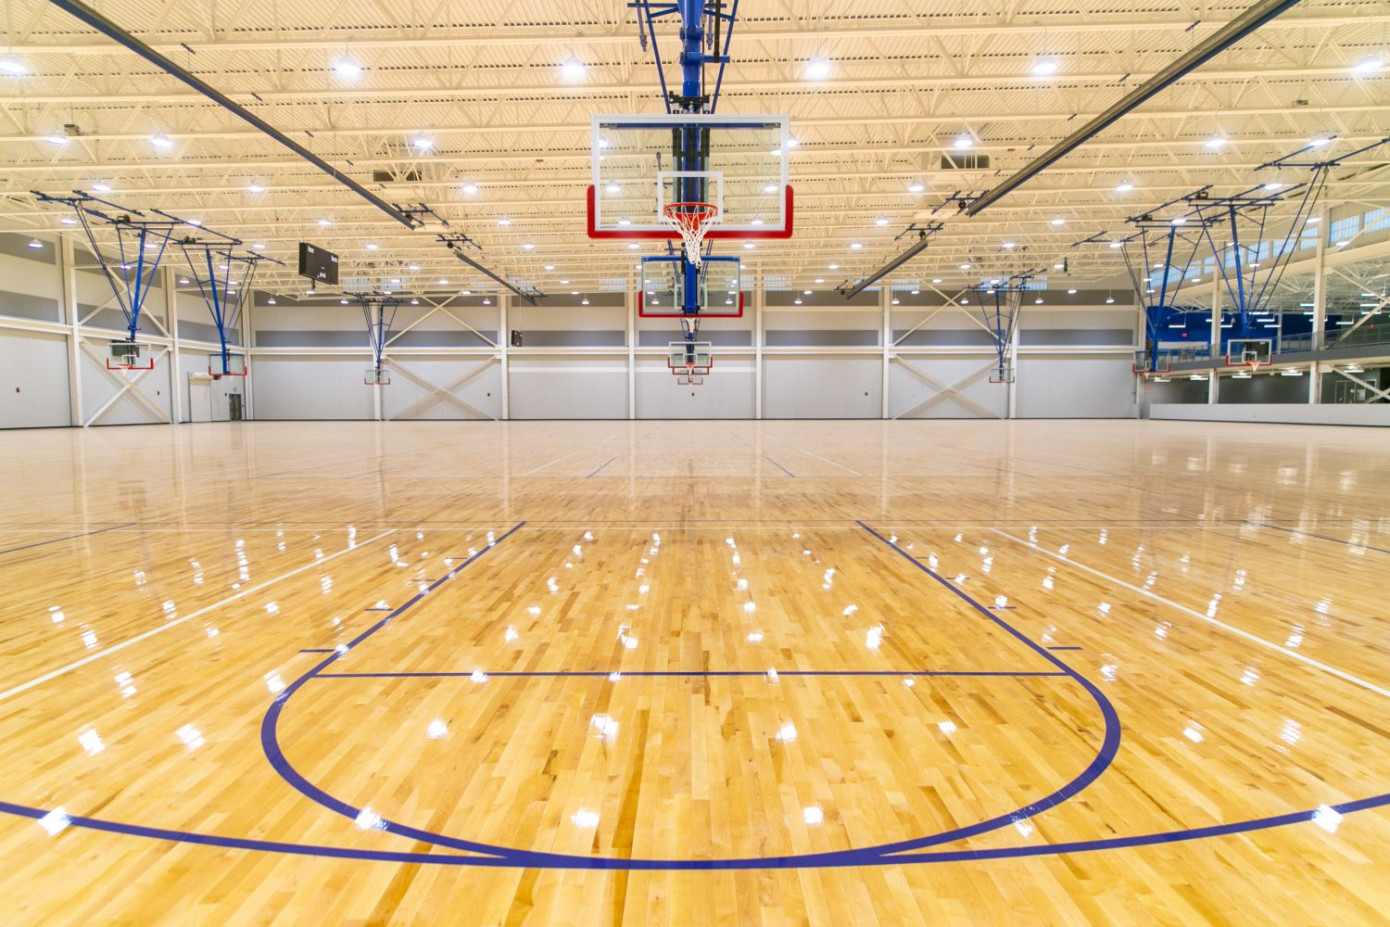 L2 Capital acquires hardwood sports flooring manufacturer Robbins Sports Surfaces